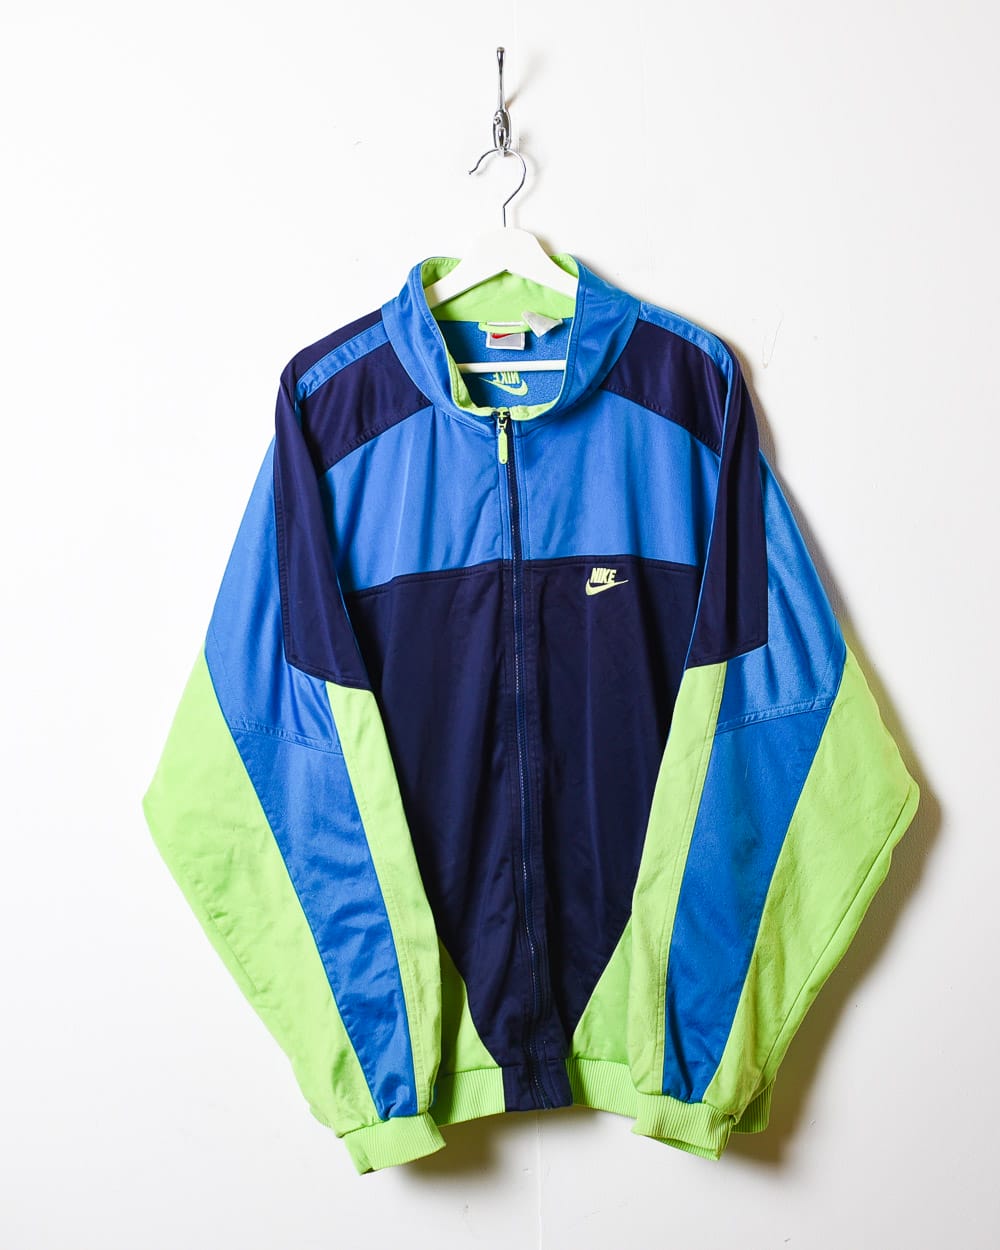 Blue Nike Tracksuit Top - XX-Large